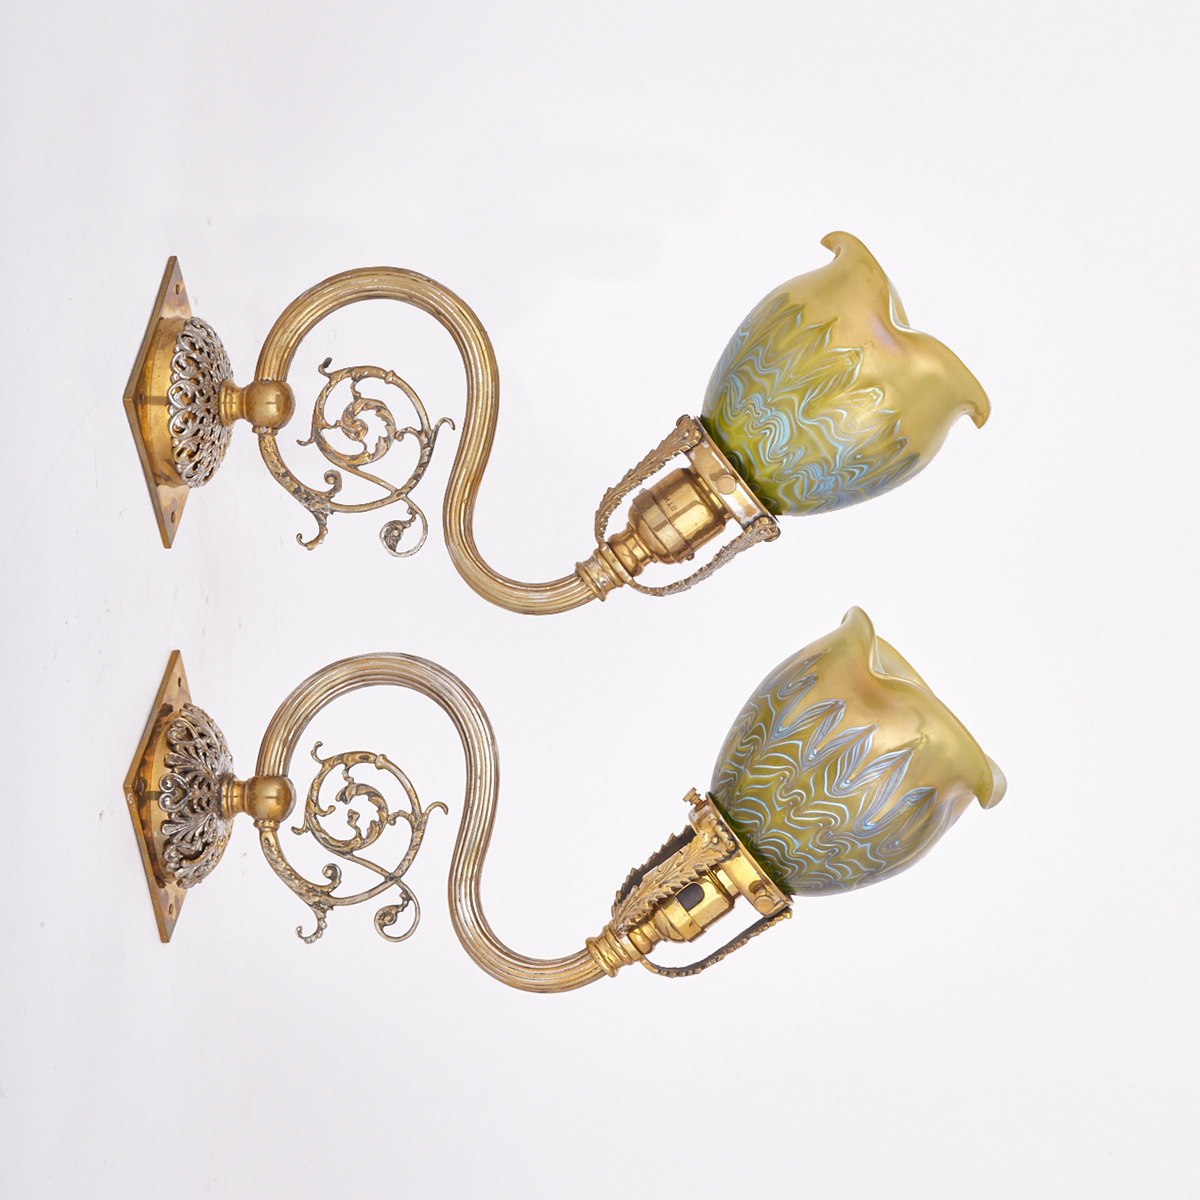 Pair of SIlvered Brass Wall Sconces with Iridescent glass shades, 19th century 